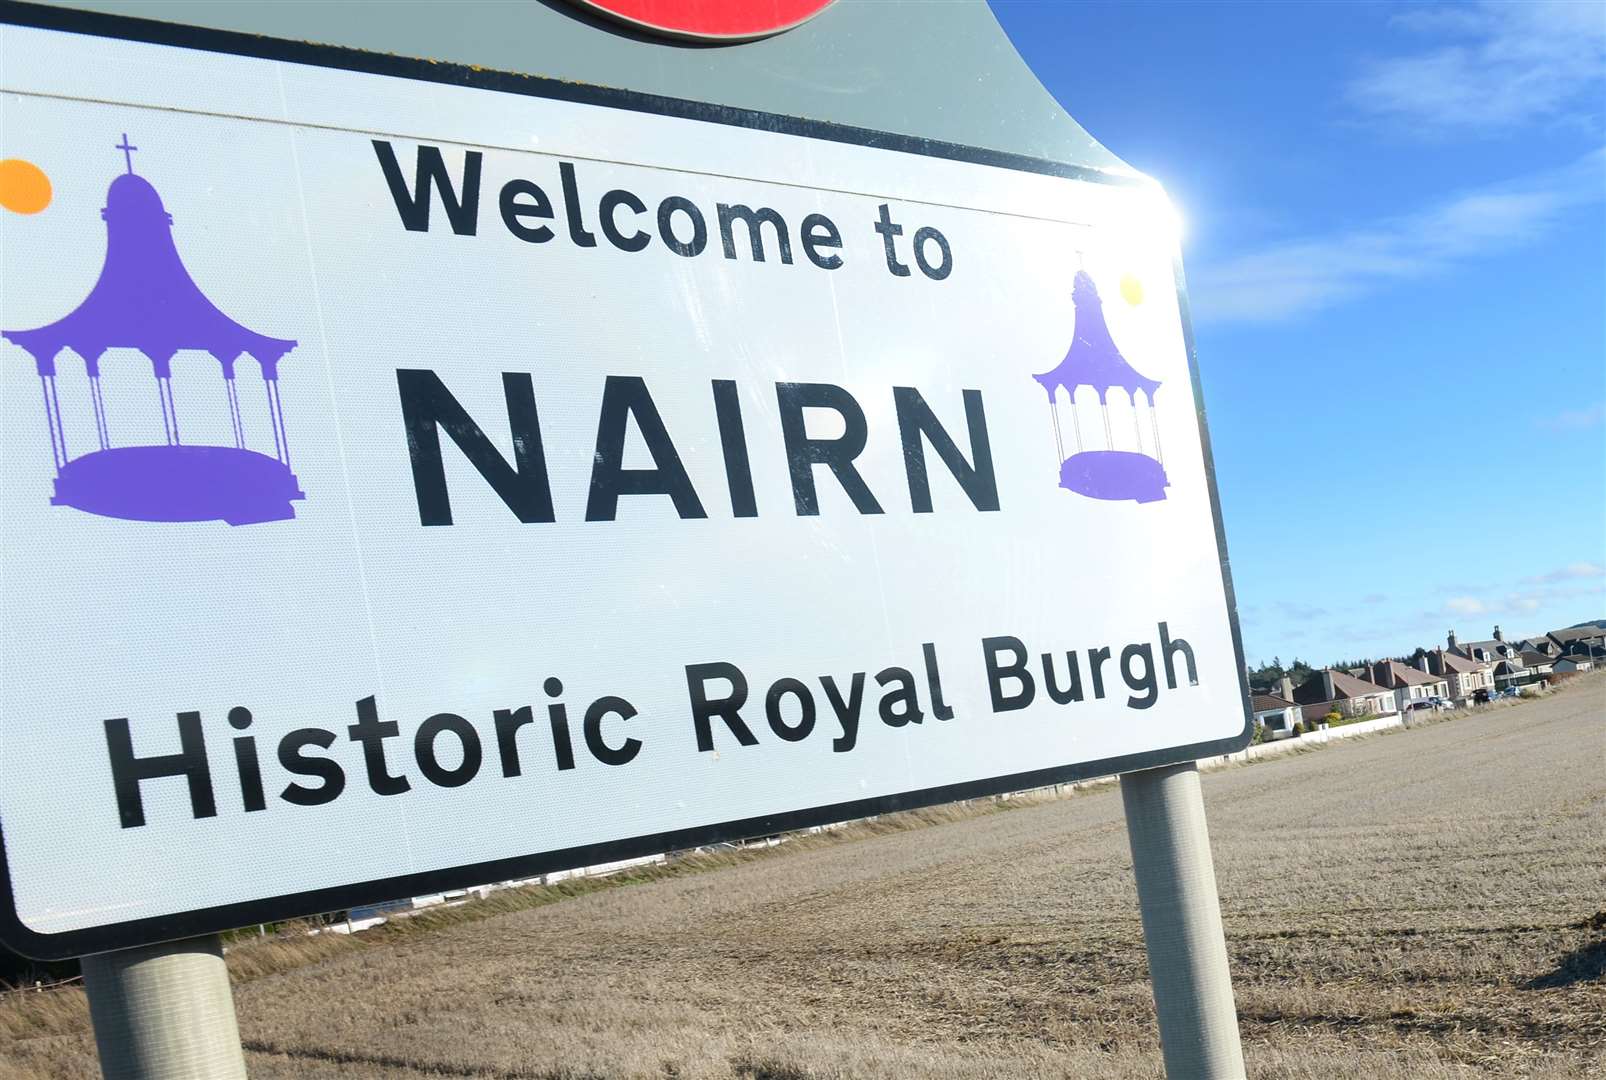 Nairn could be the site of the one of largest land developments in the Highlands.